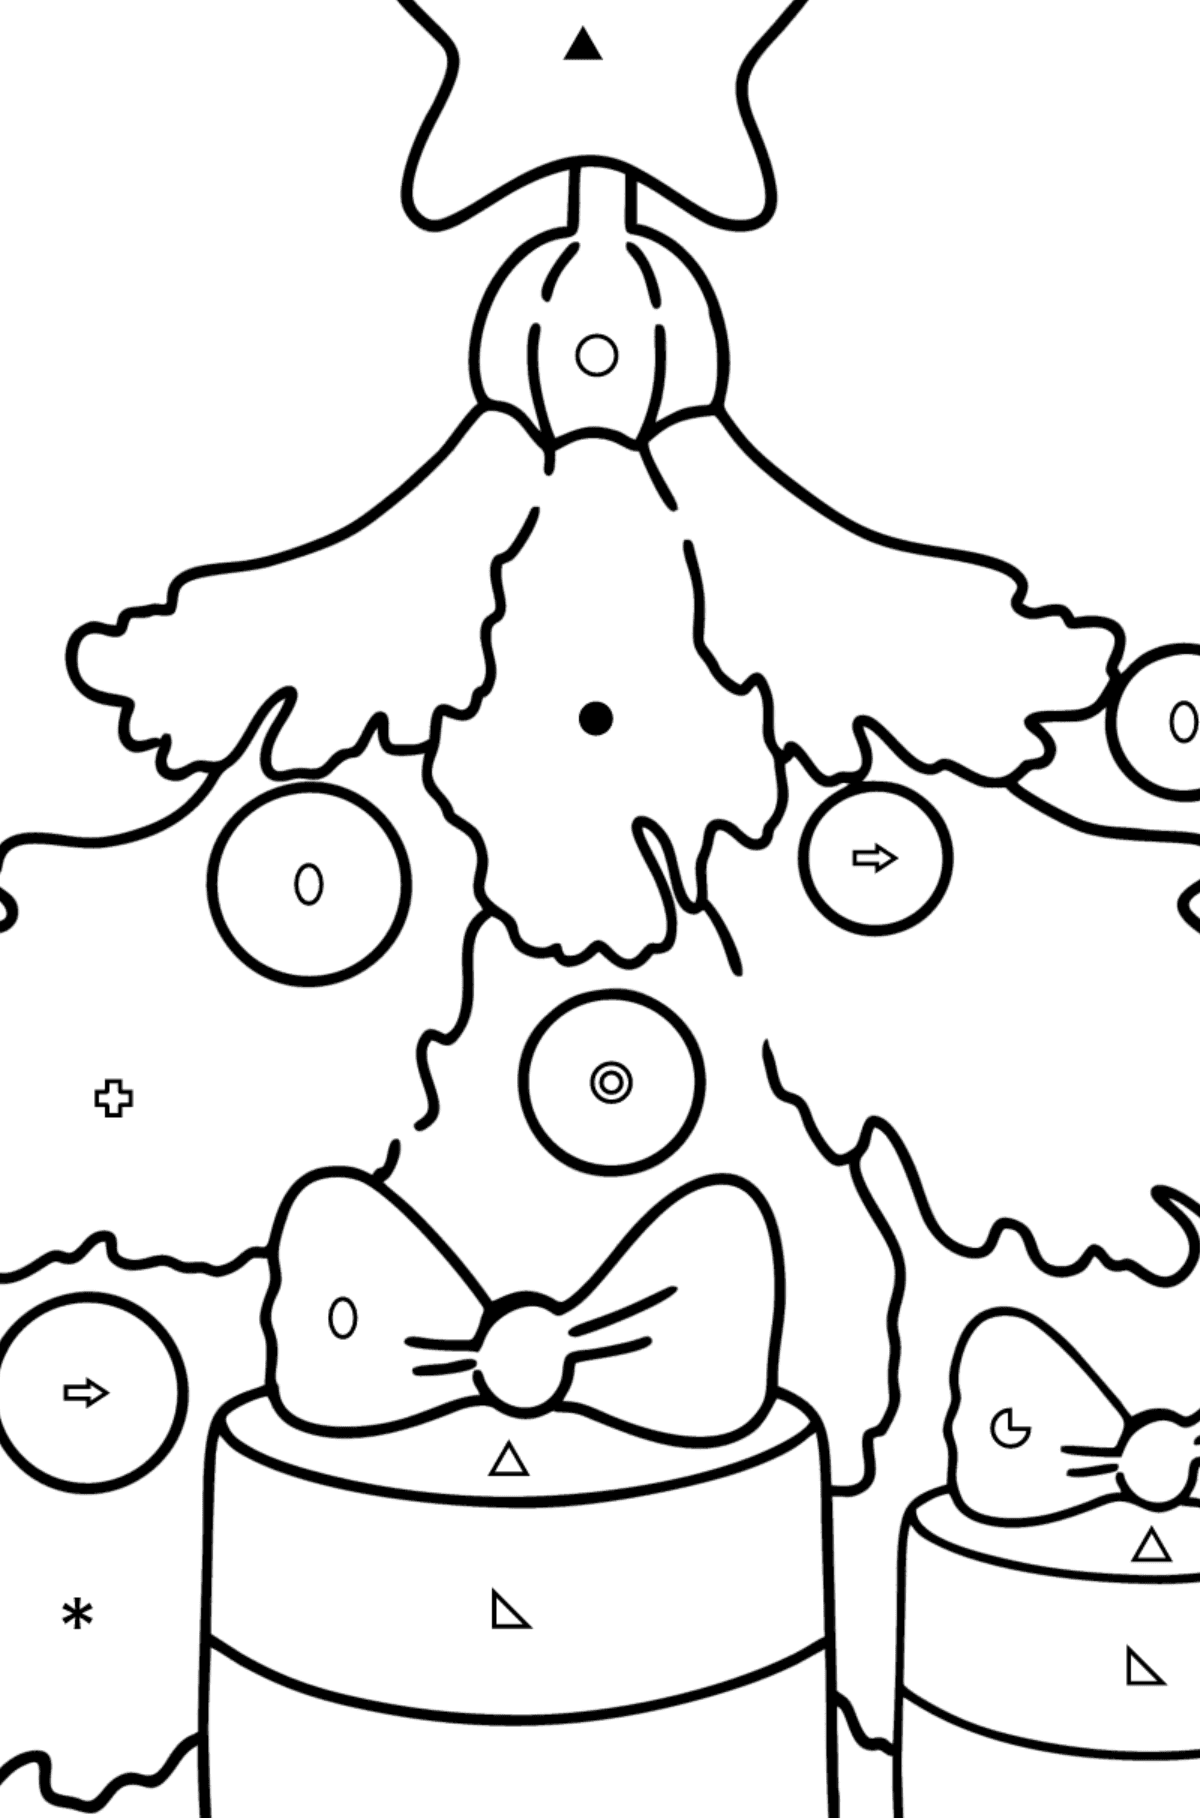 Christmas Tree and Gifts coloring page - Coloring by Symbols and Geometric Shapes for Kids